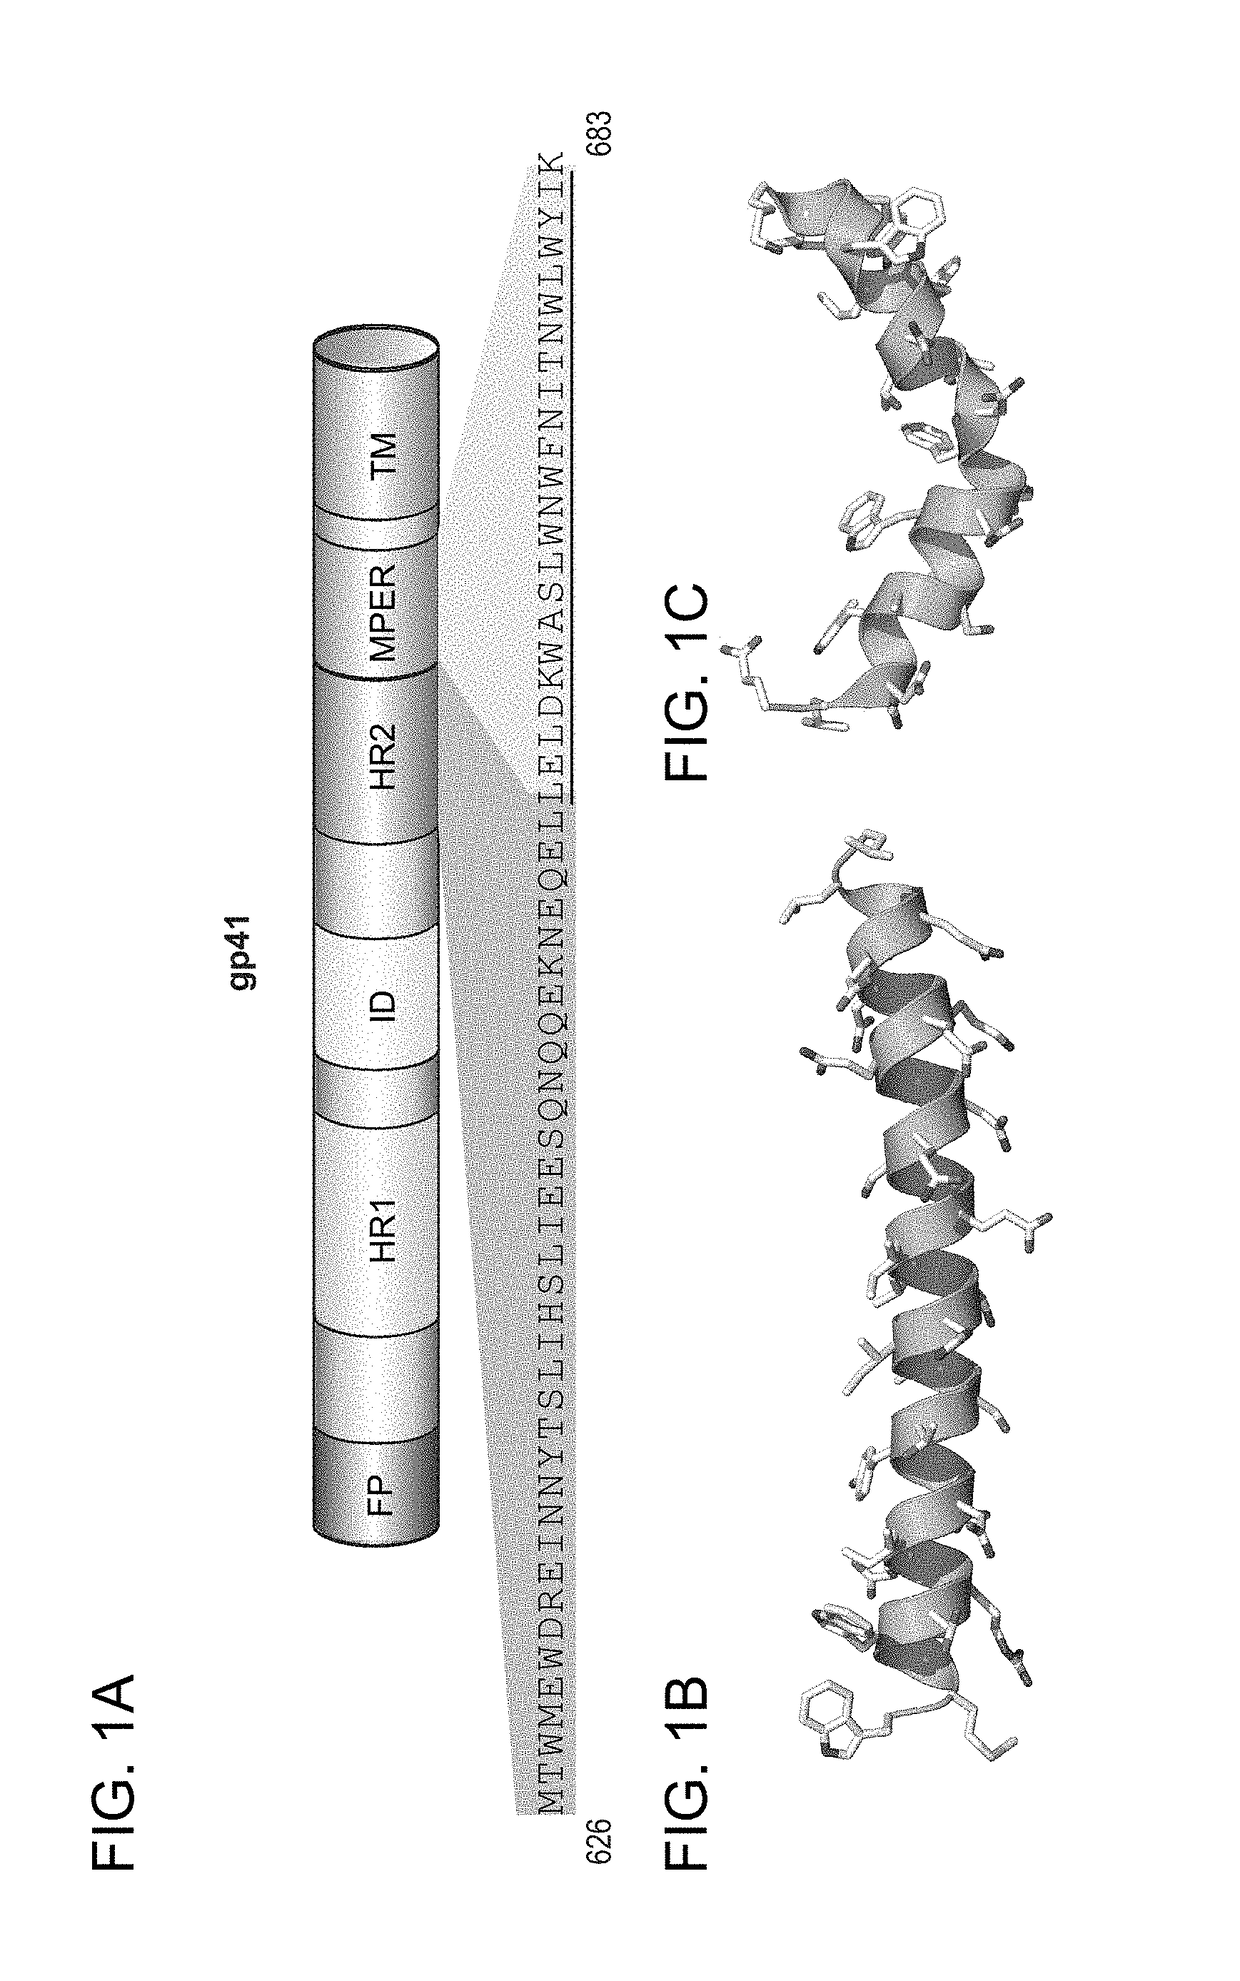 Hydrocarbon stapled stabilized alpha-helices of the HIV-1 GP41 membrane proximal external region